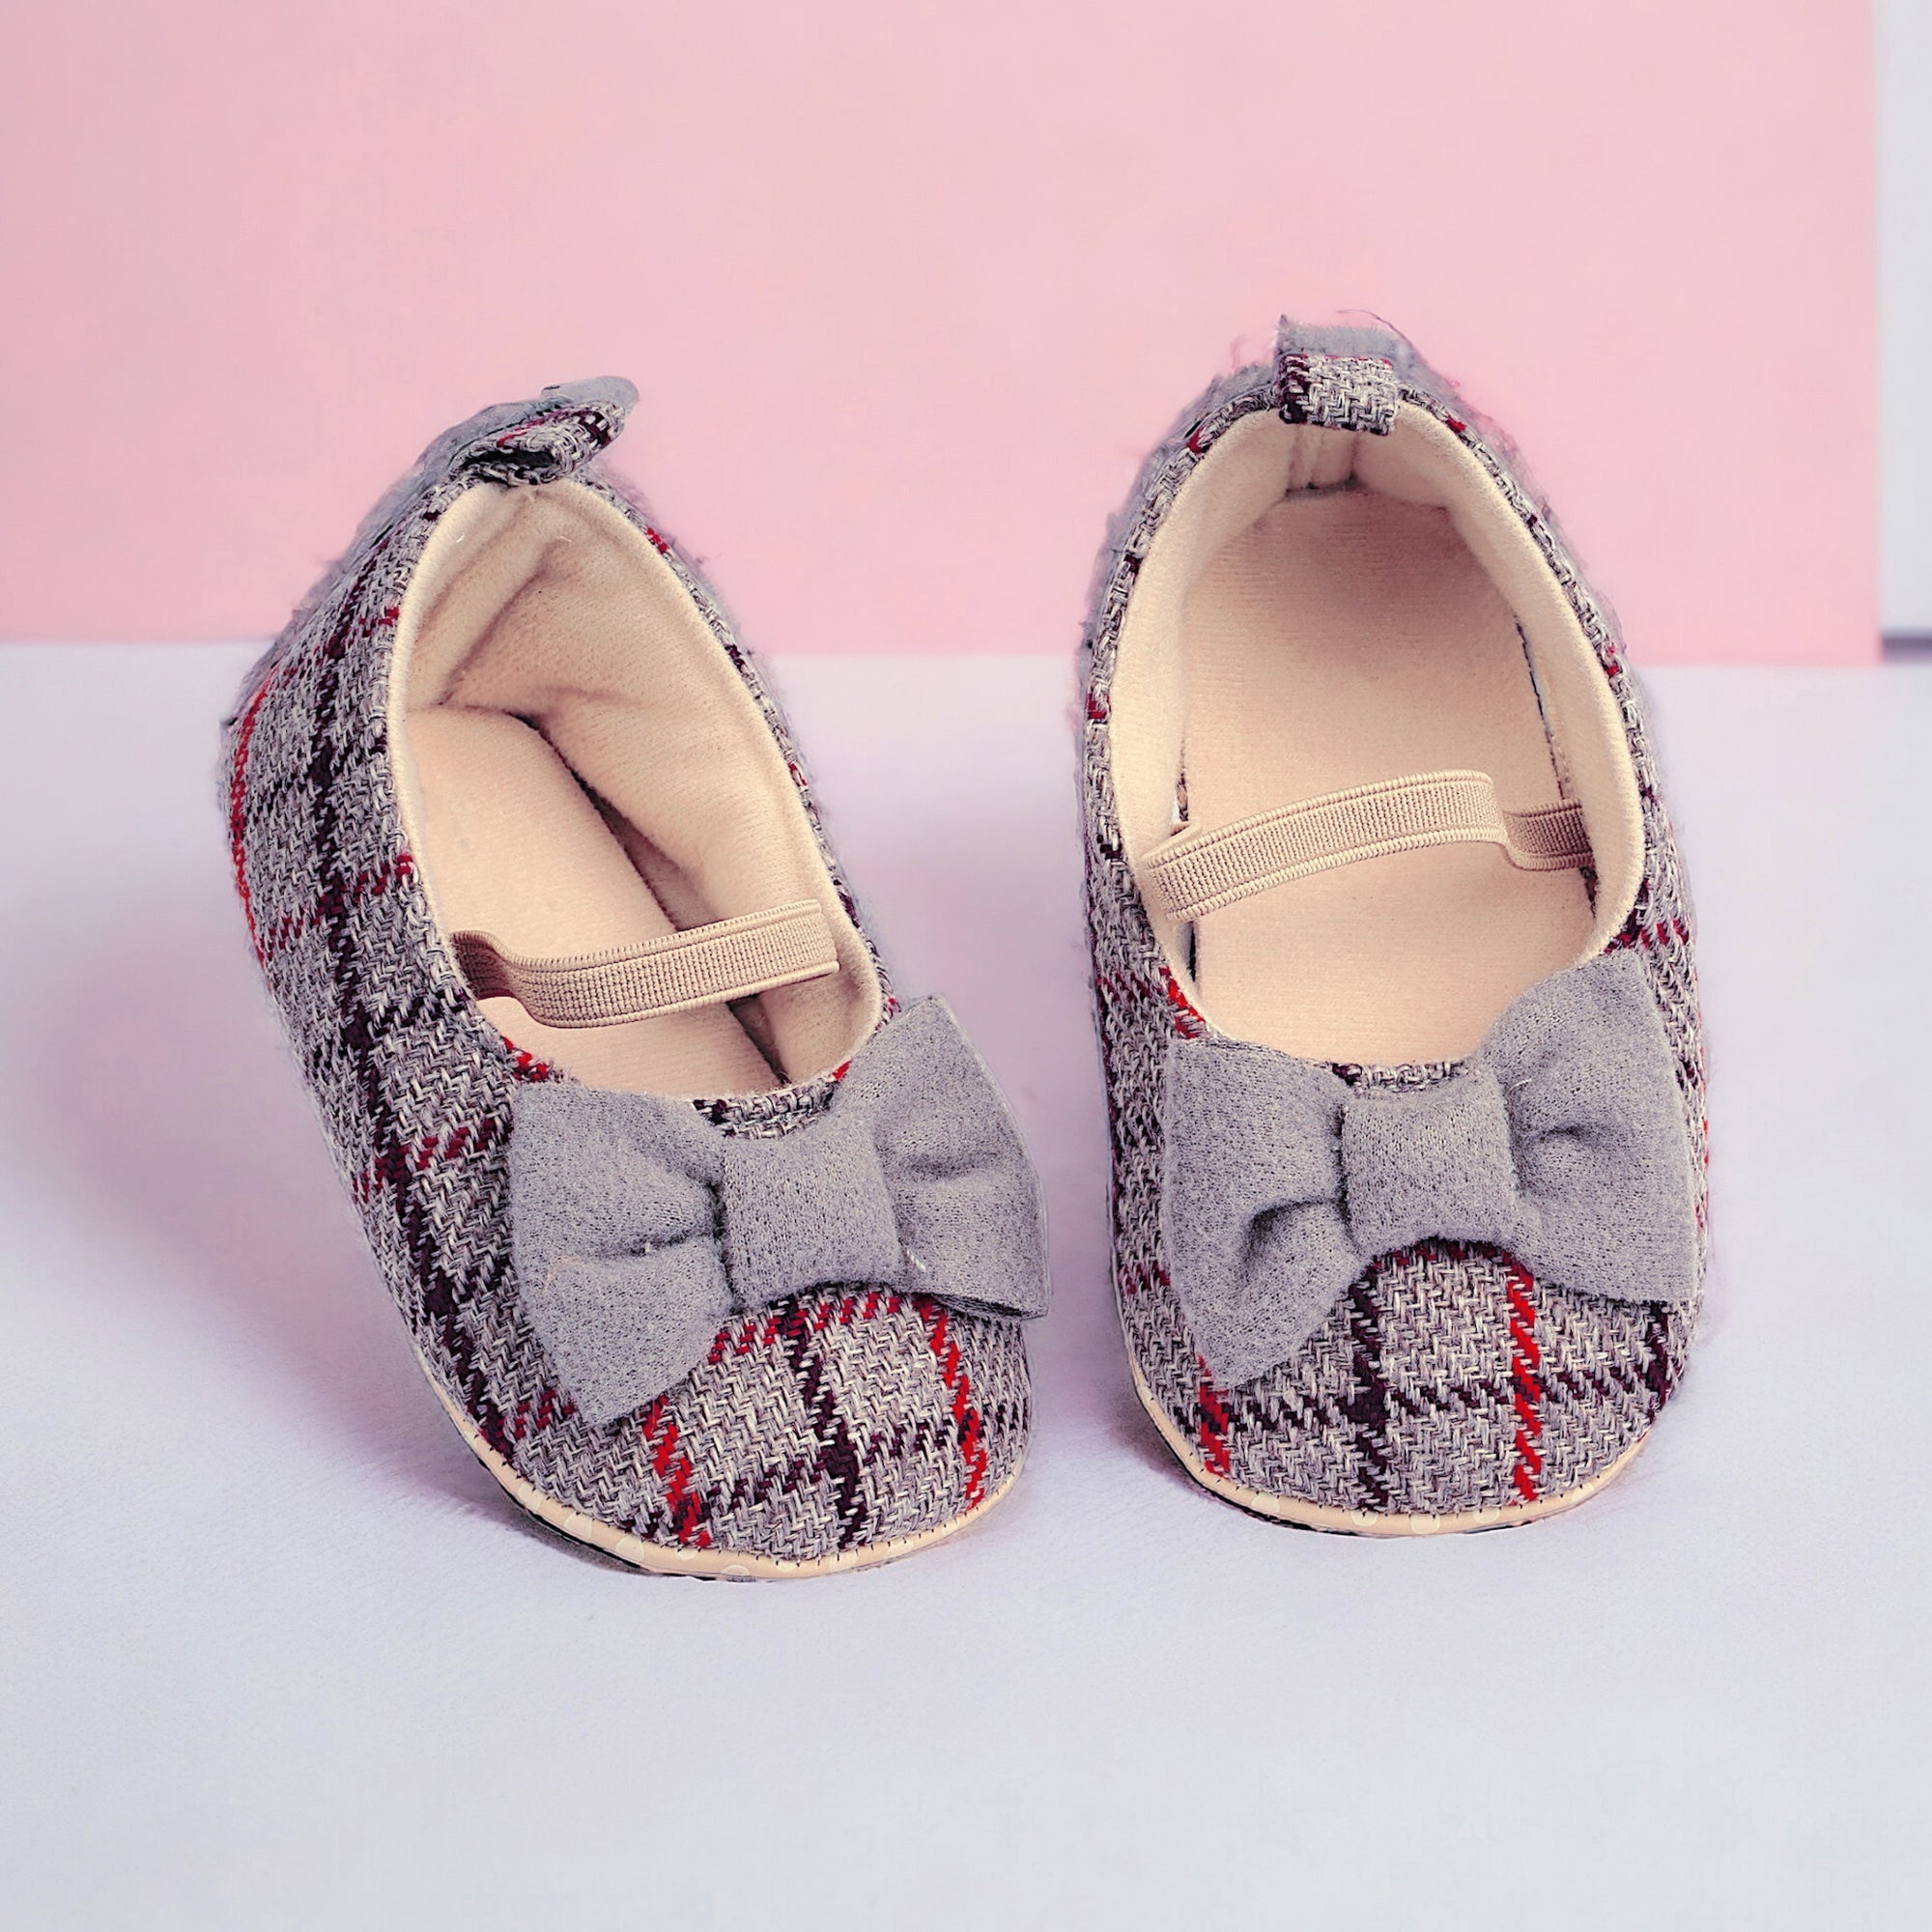 Baby Moo Bow With Elastic Strap Plaid Ballerina Booties - Grey